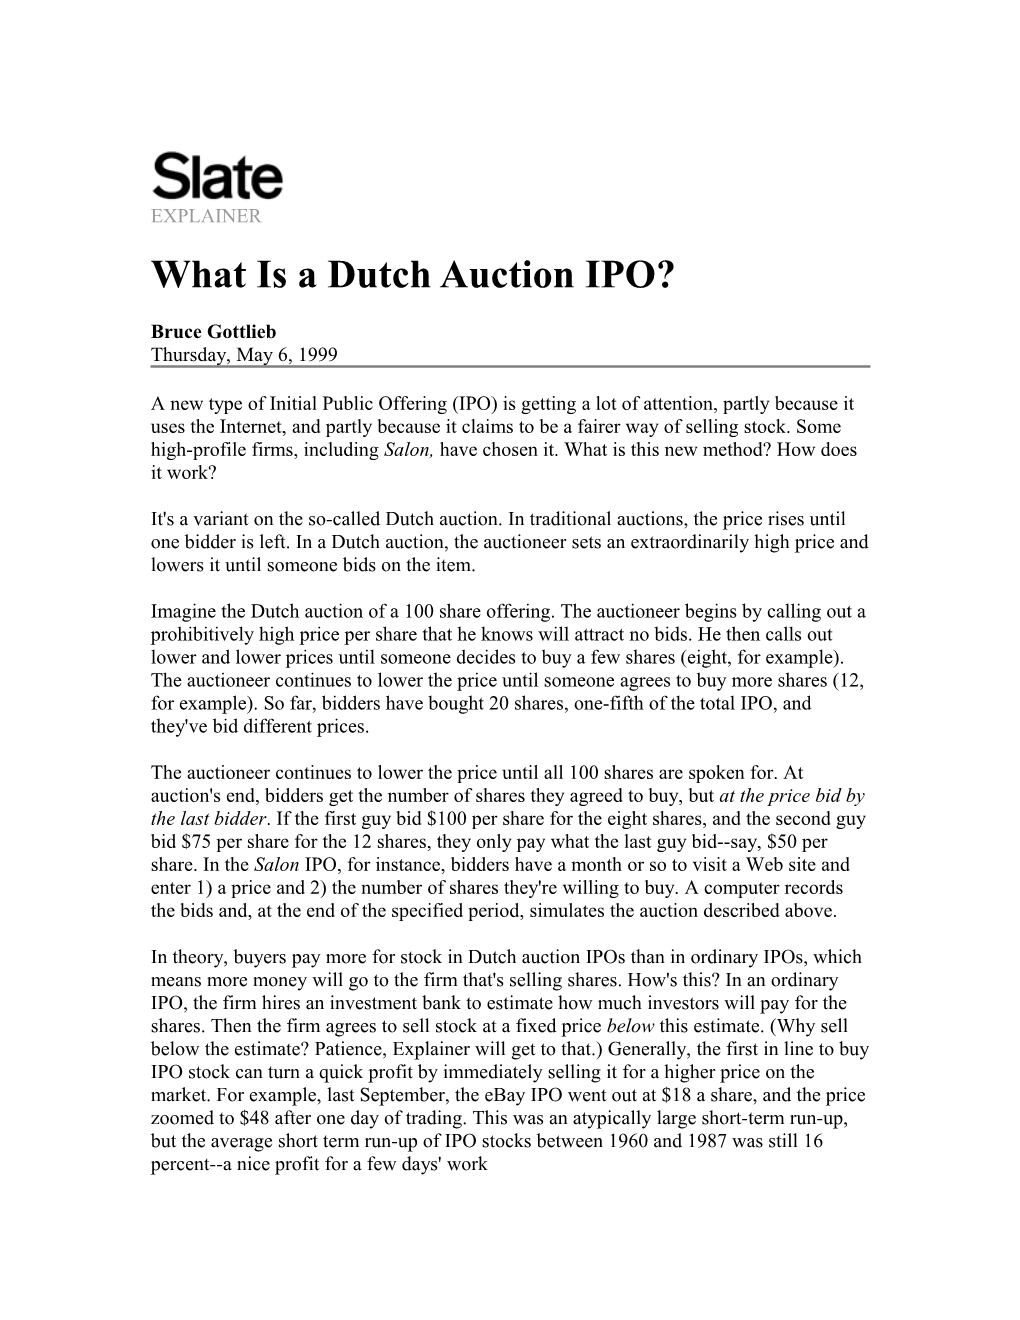 What Is a Dutch Auction IPO?